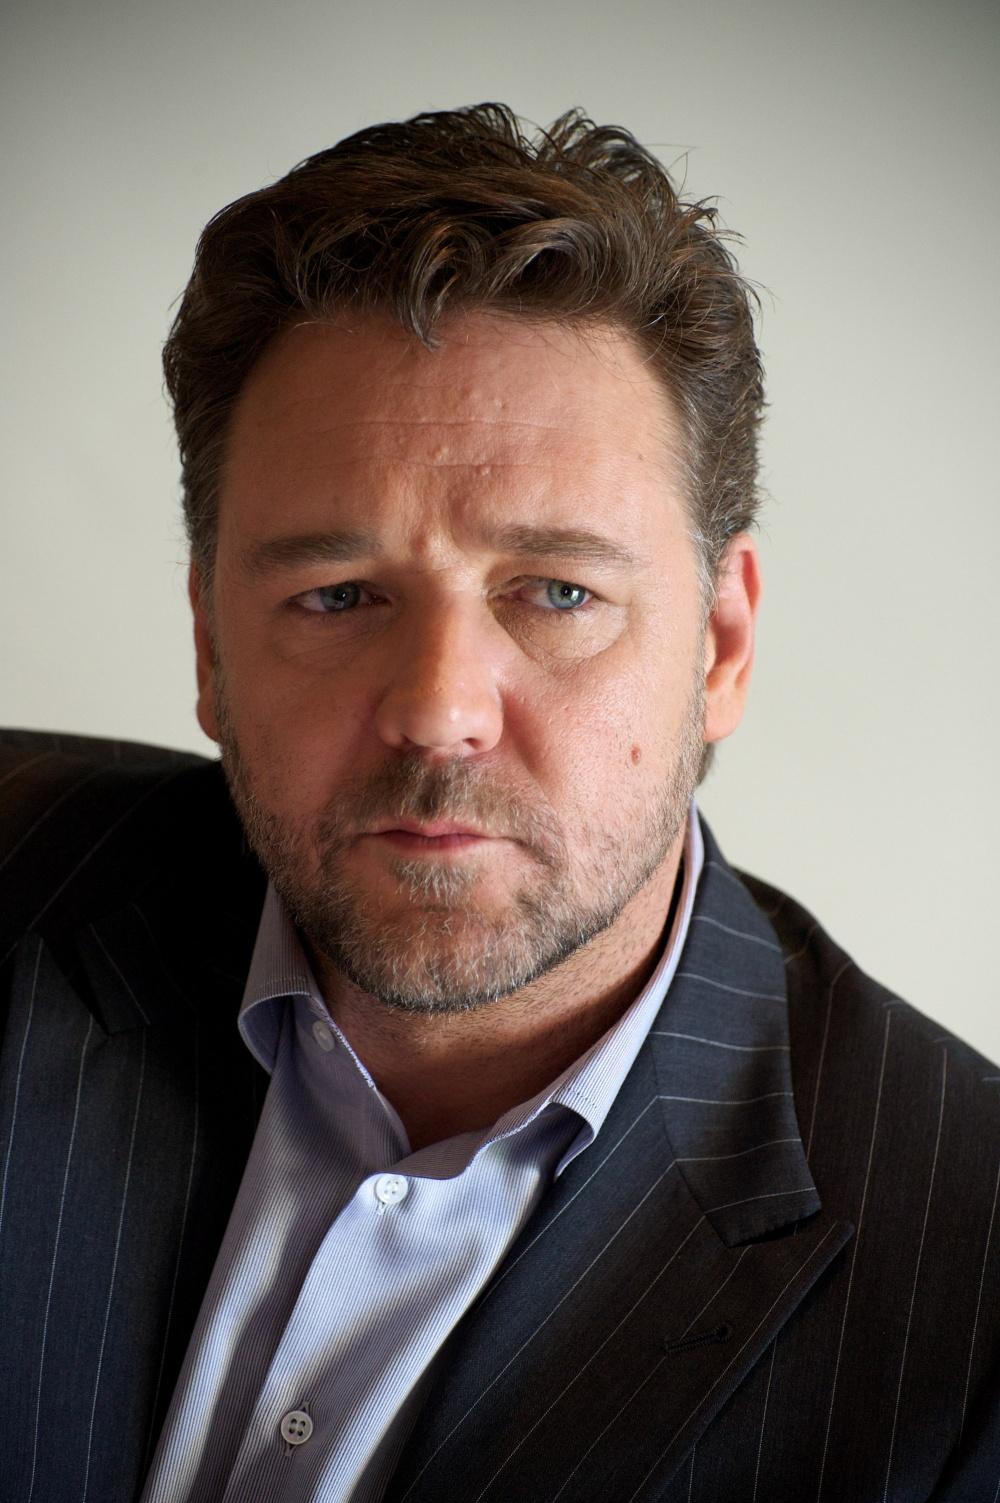 Photo №3955 Russell Crowe.